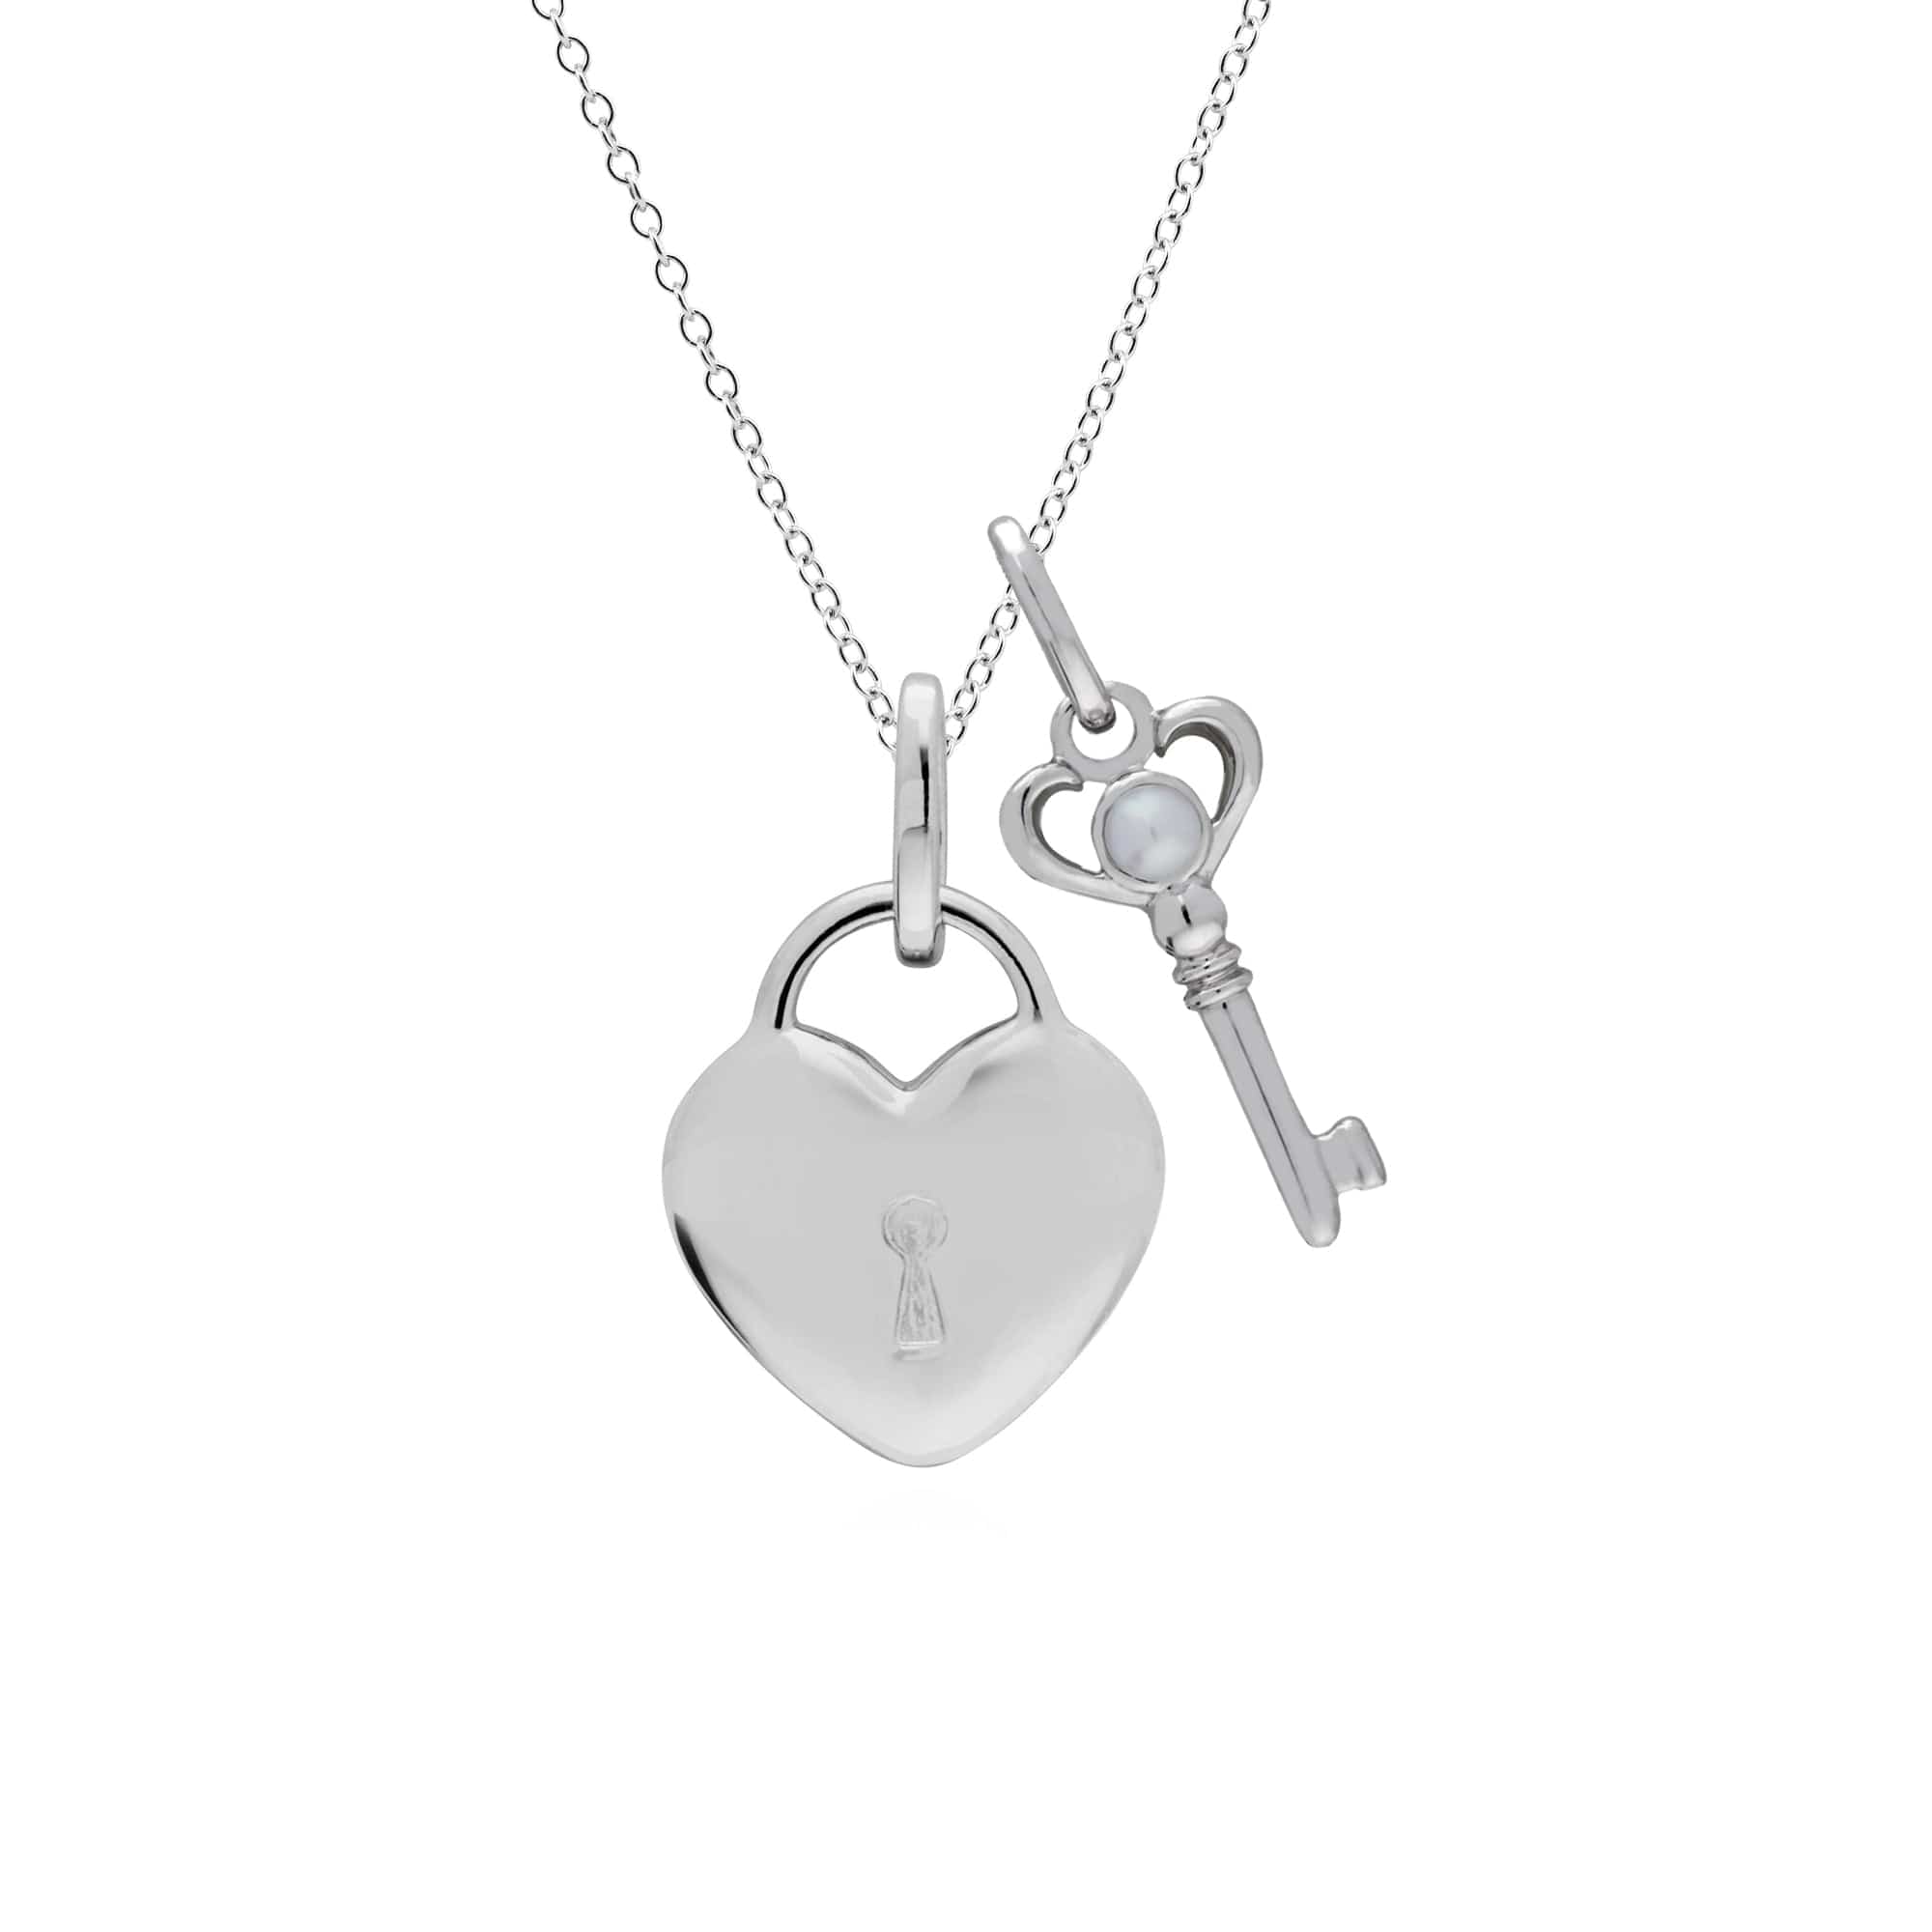 270P027201925-270P027001925 Classic Heart Lock Pendant & Pearl Key Charm in 925 Sterling Silver 1